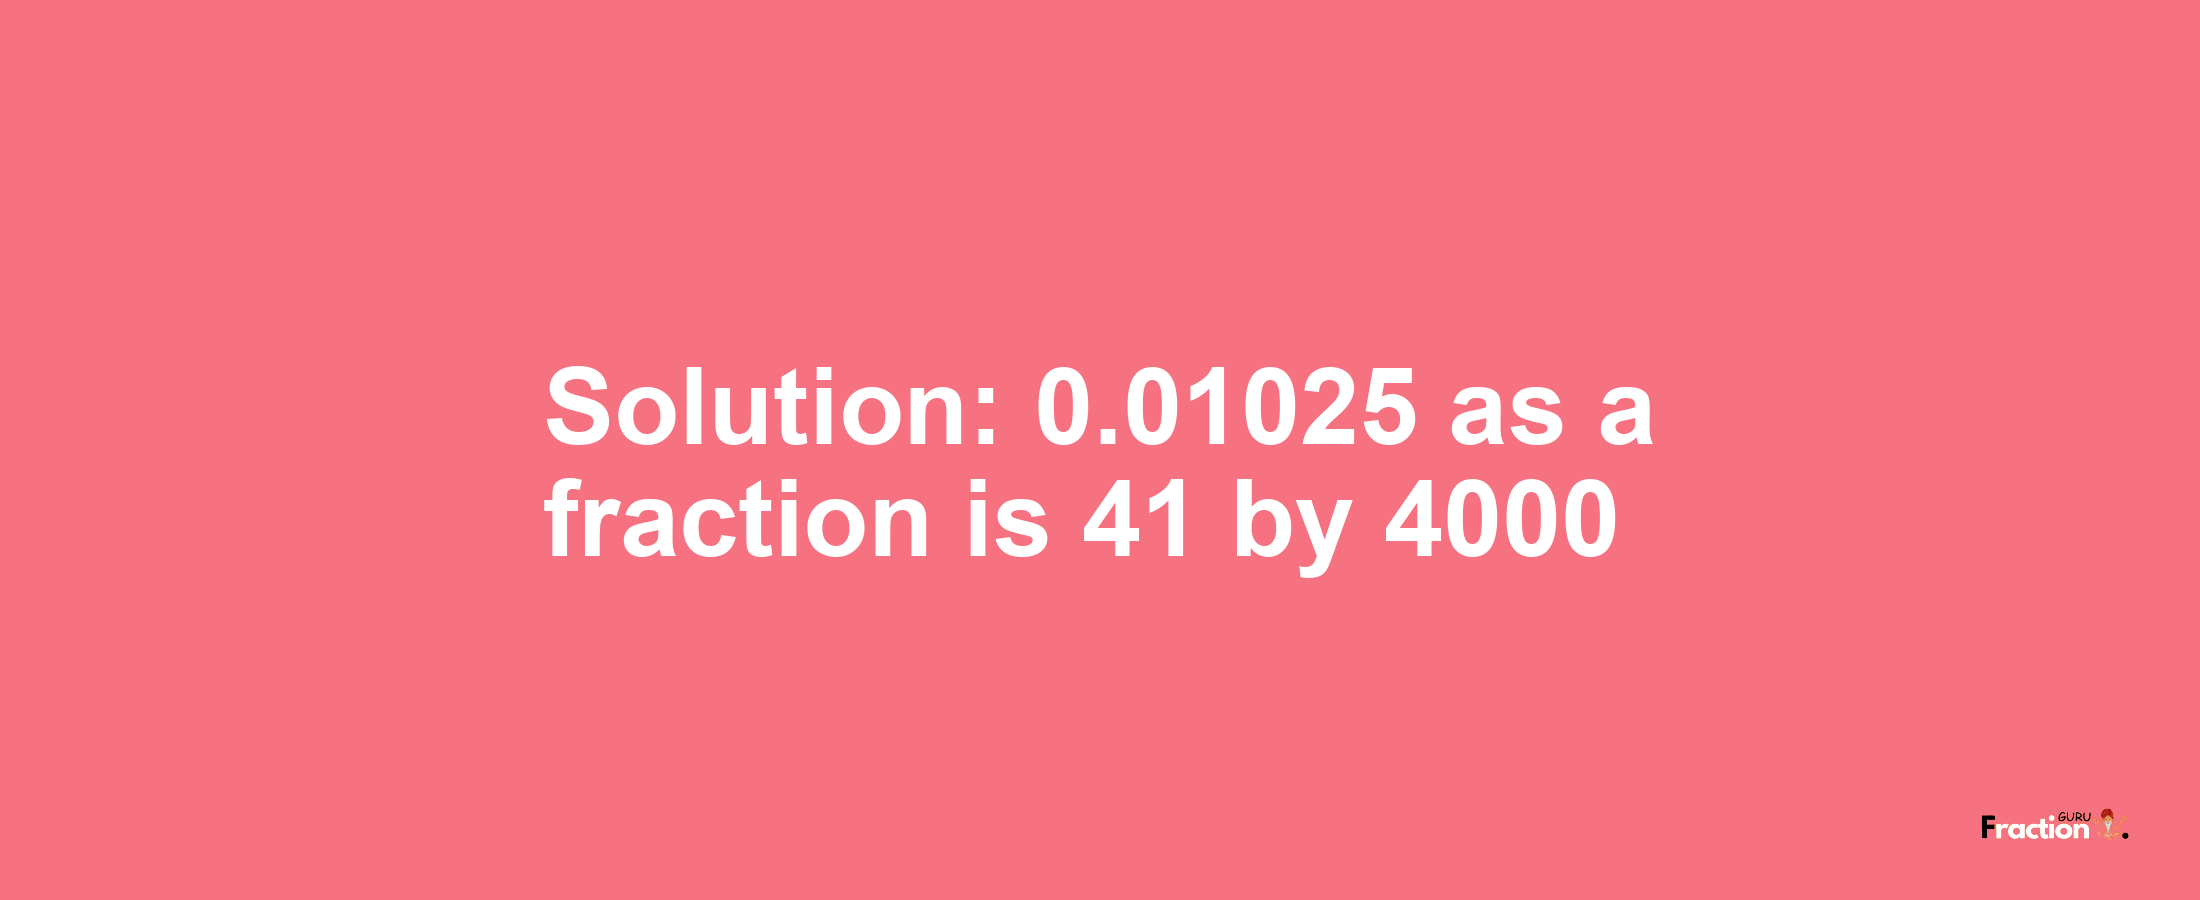 Solution:0.01025 as a fraction is 41/4000